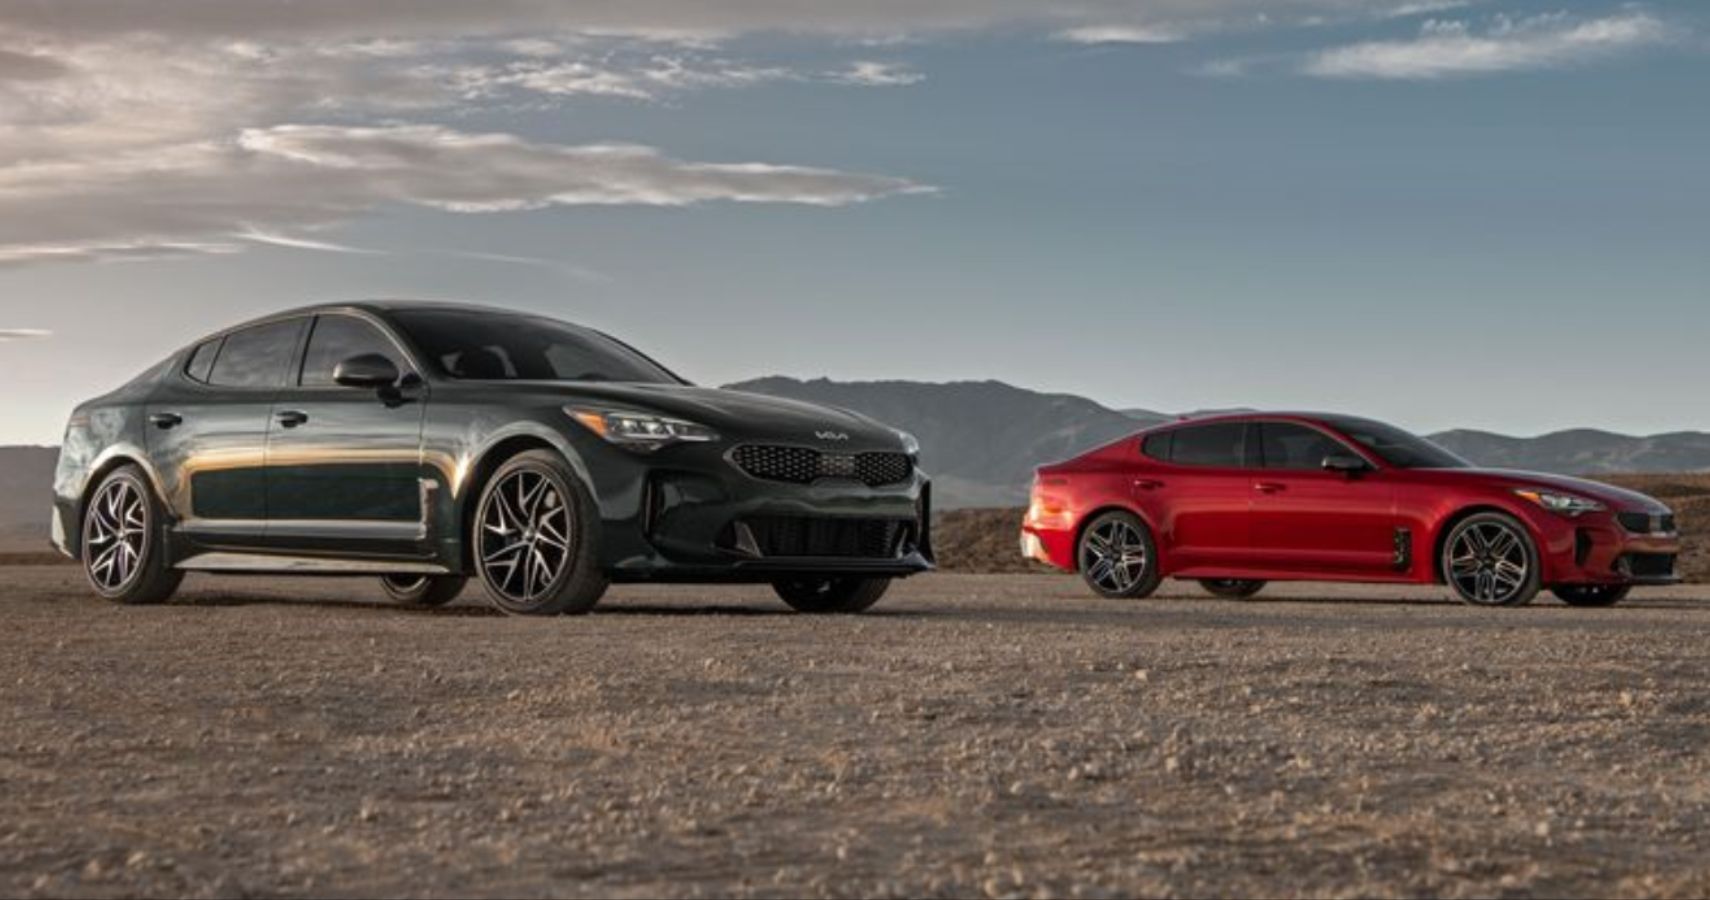 2022 Kia Stinger GT and GT2 Front view in parking lot